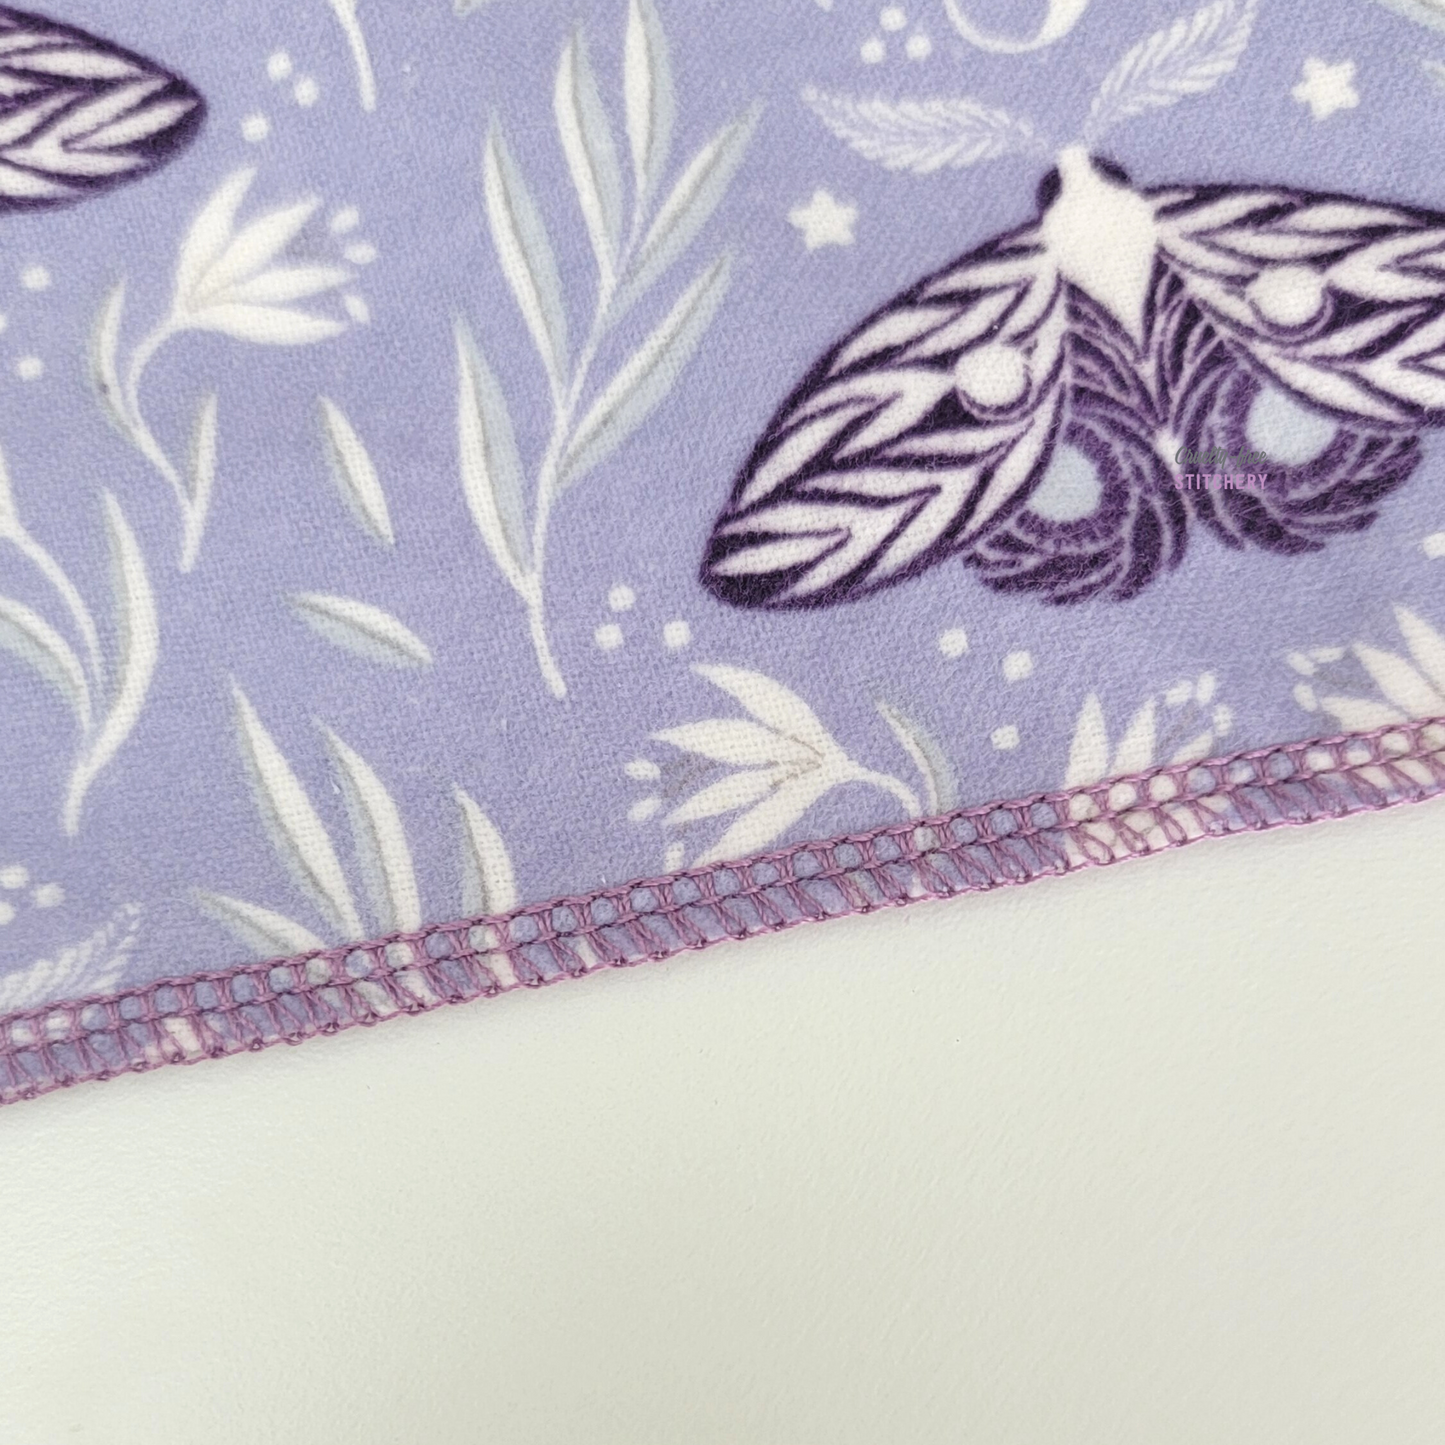 Close-up of the bottom edge of the purple moths NonPaper Towel. The towel has a light purple background with white vines and dark purple moths, and the edge is stitched with a lilac purple thread.